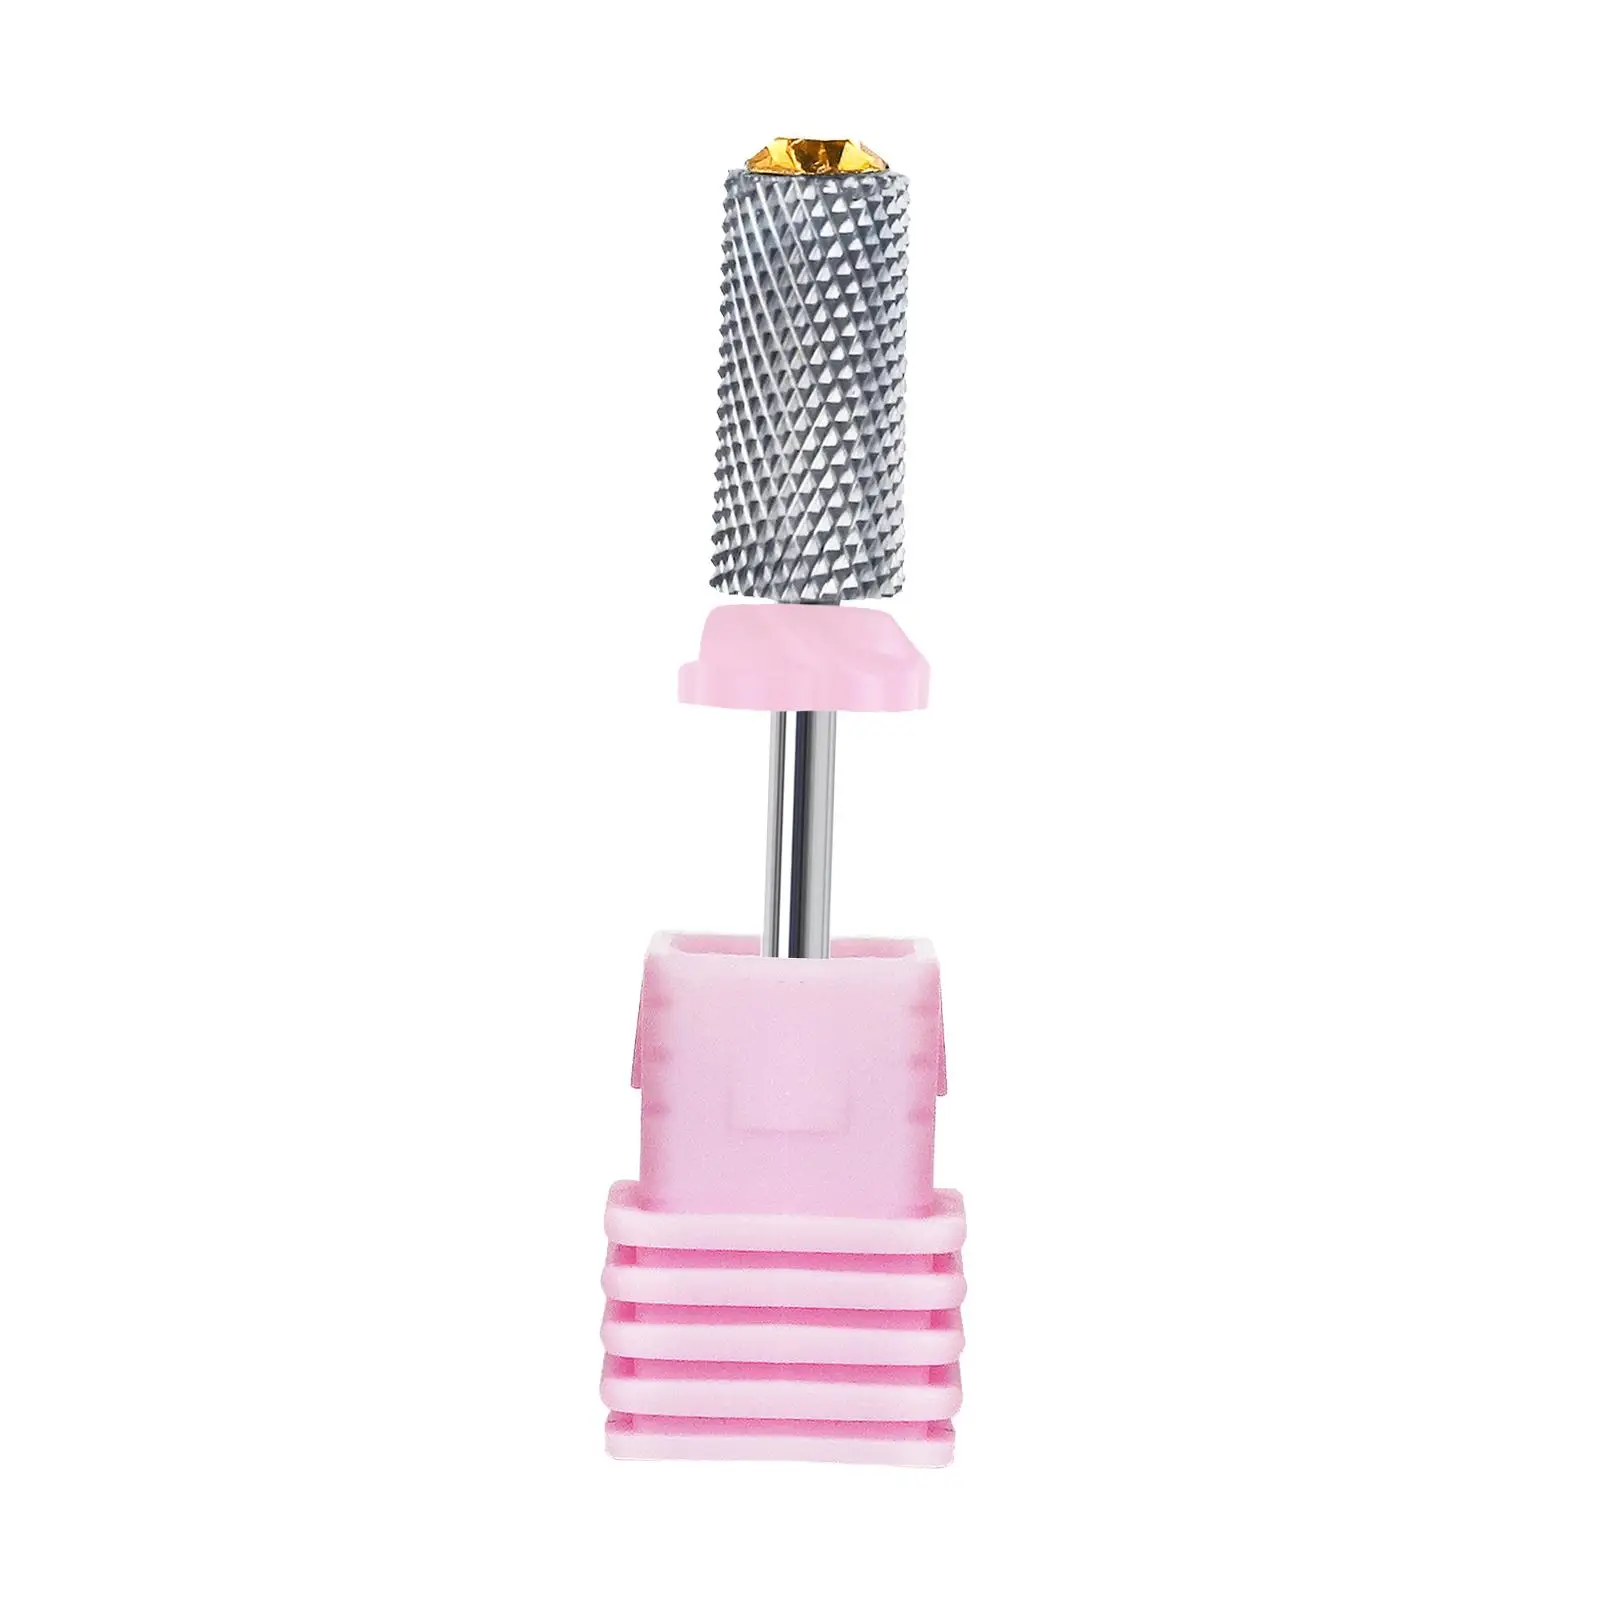 Nail Drill Bit Accessories Electric Nail File Machine Bit Rotary Burrs Cuticle Remover Bit for Acrylic Gel Nails Salon Home Use